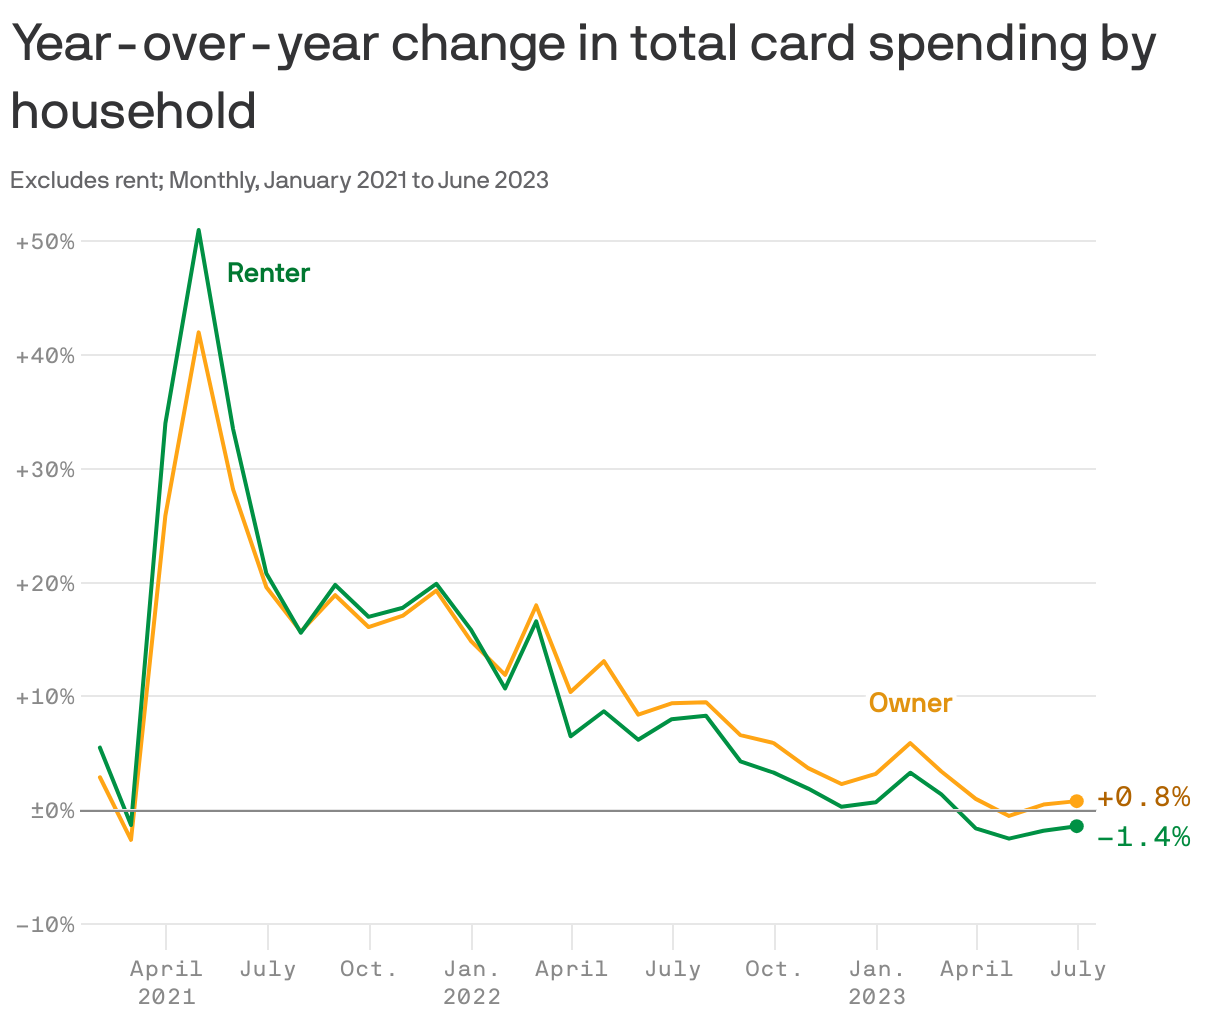 Year-over-year change in total card spending by household